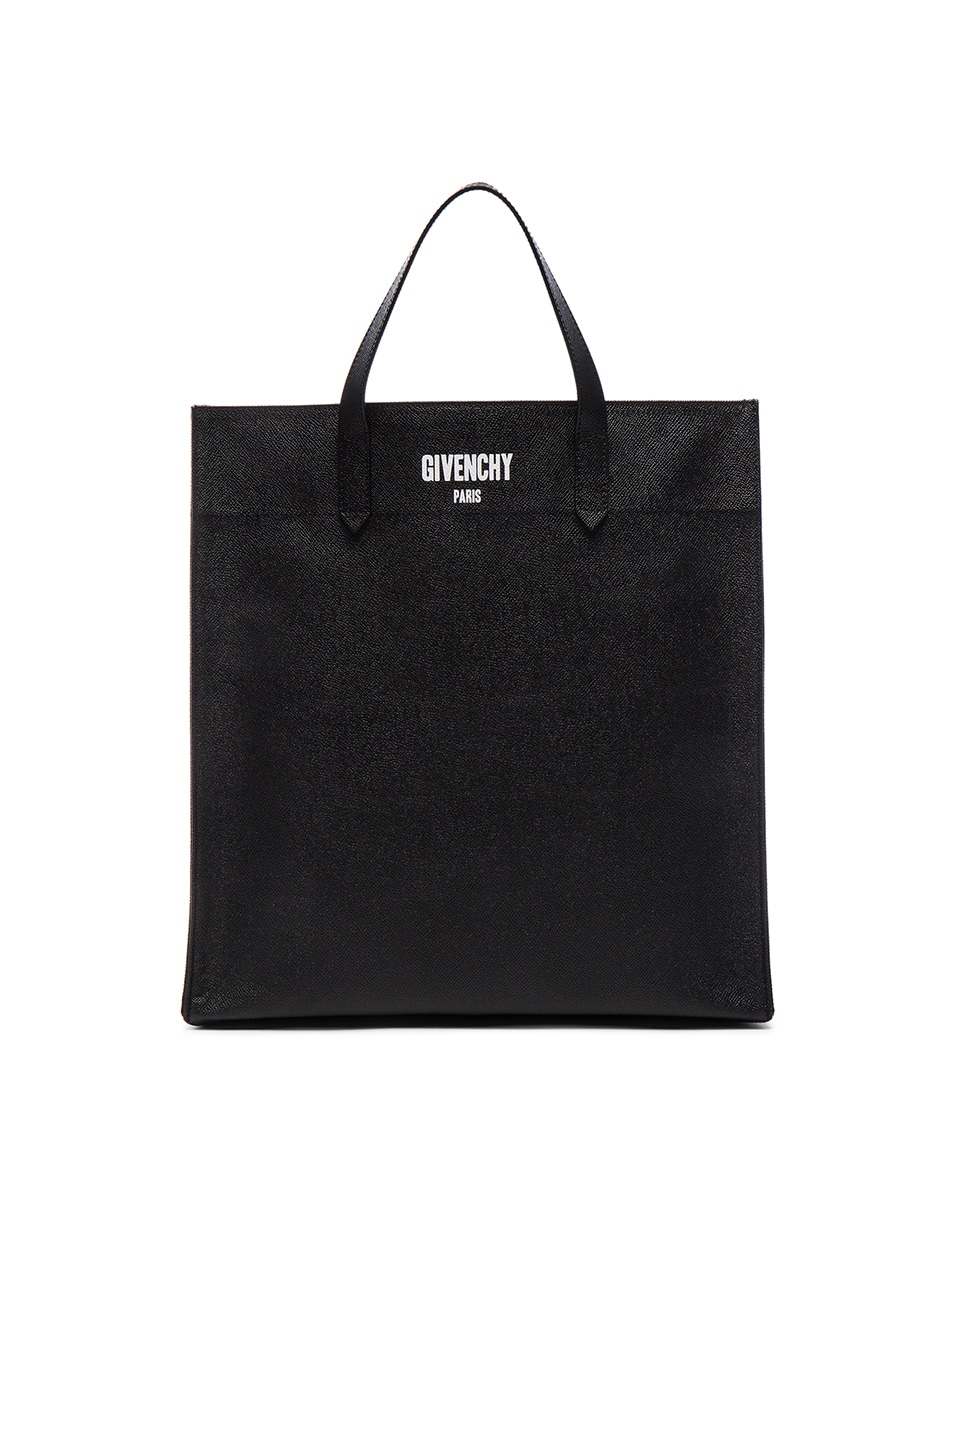 Image 1 of Givenchy Tote in Black